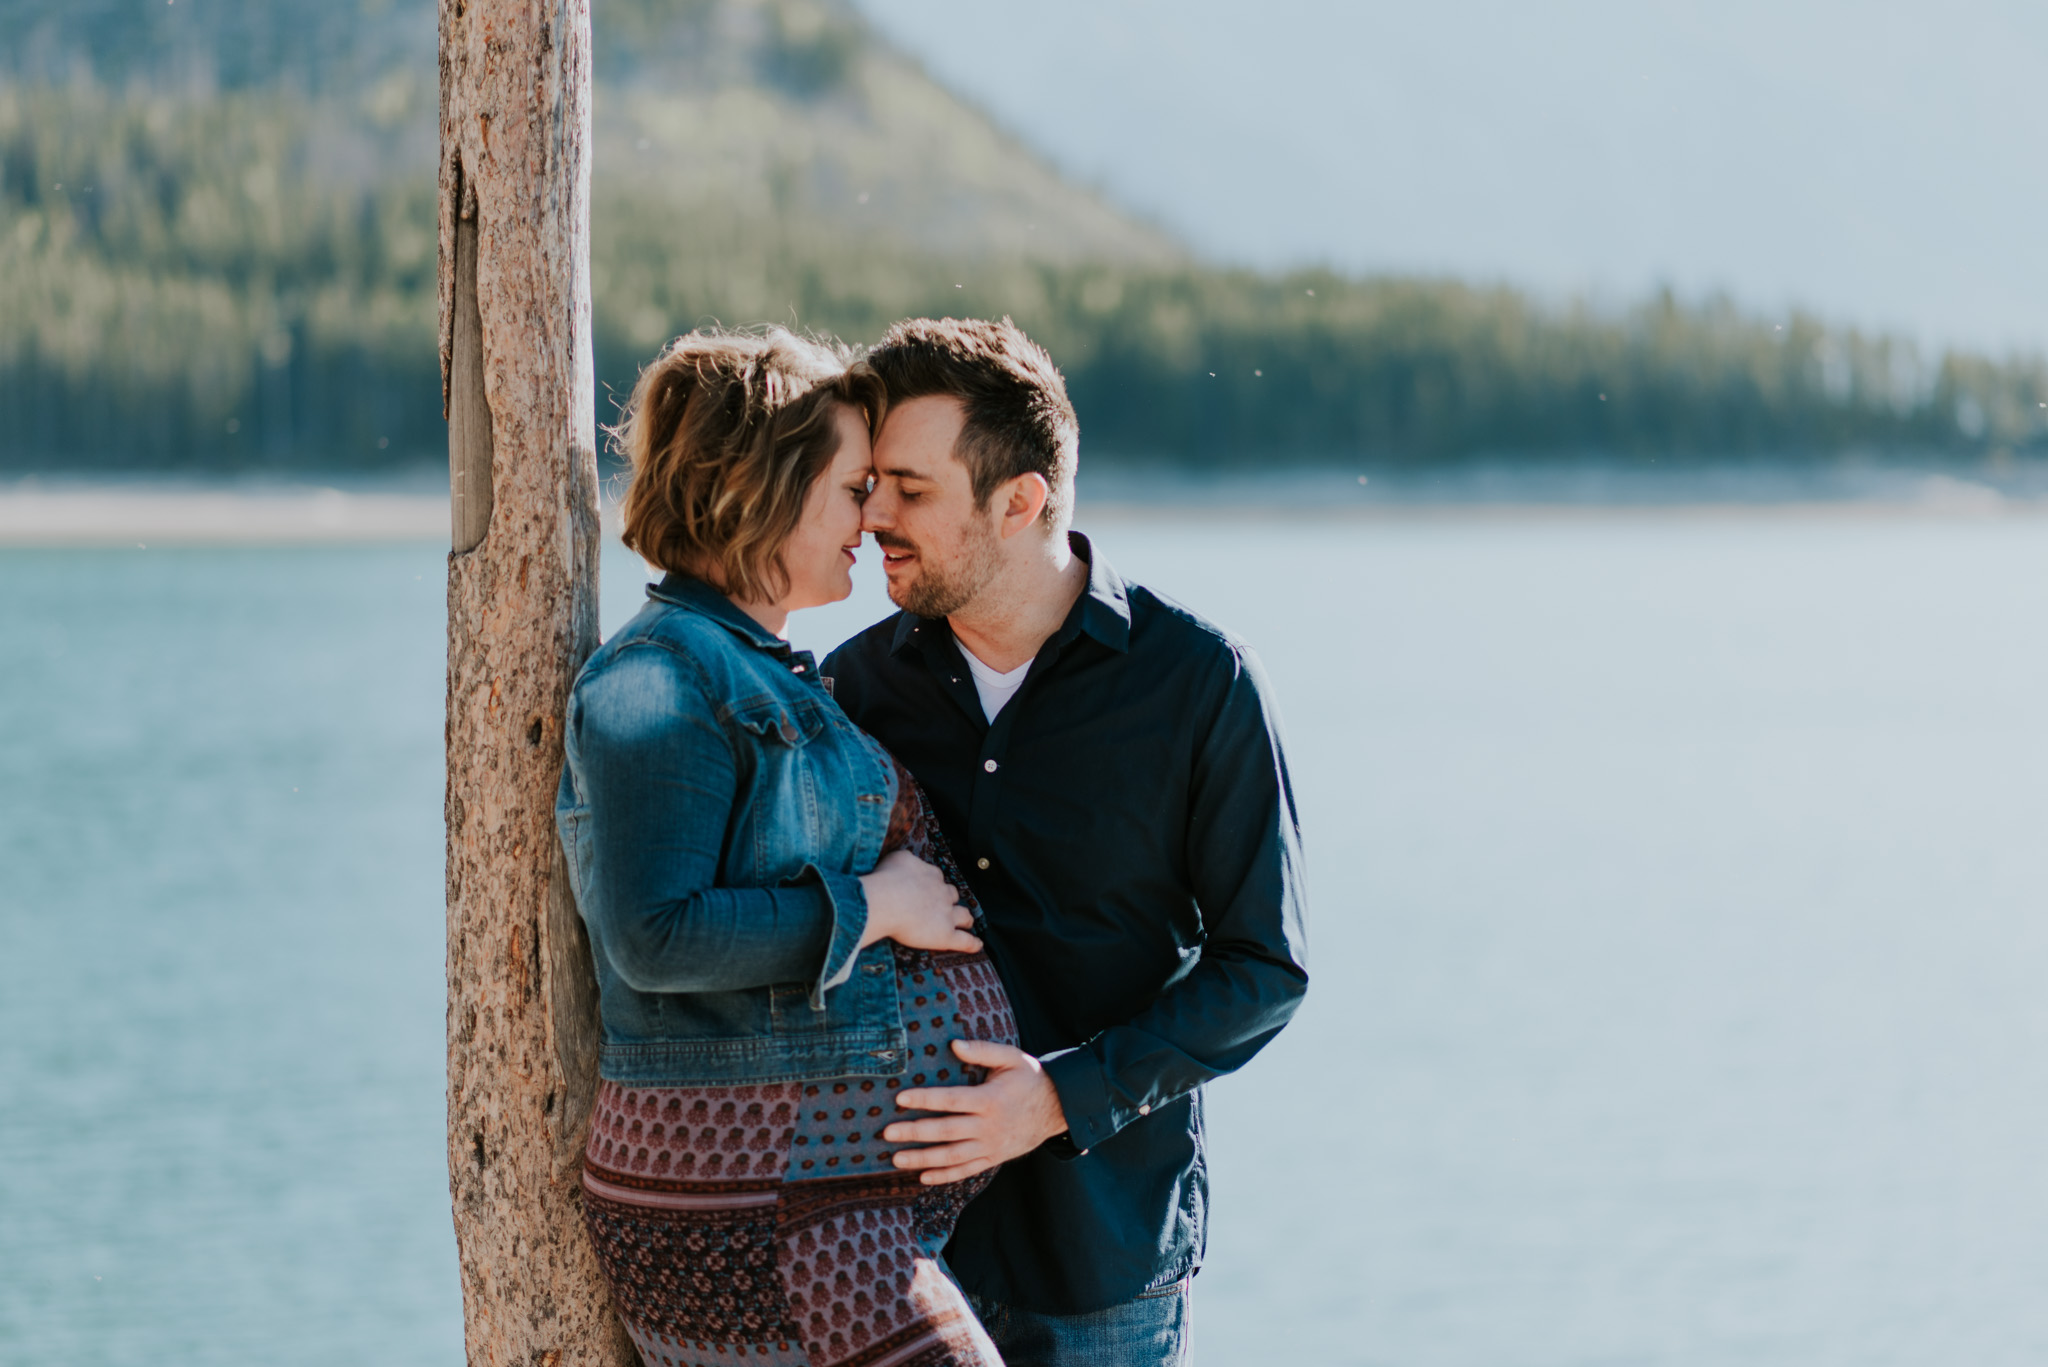 Maternity session in Banff, by Célestine Aerden Photography